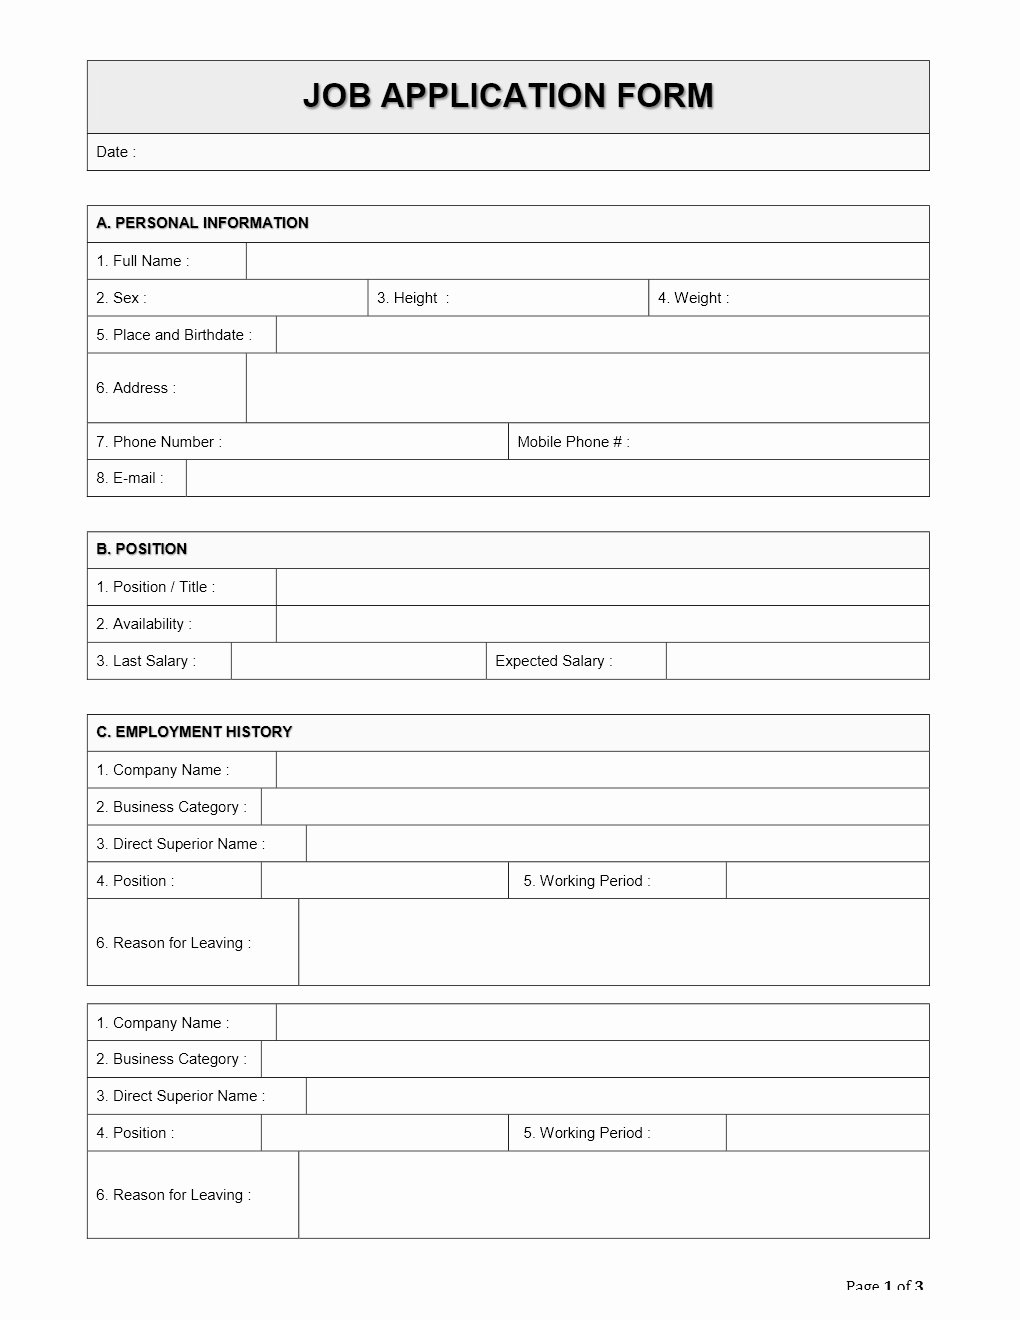 Employee Application form Template Free Beautiful Application for Employment Template Word